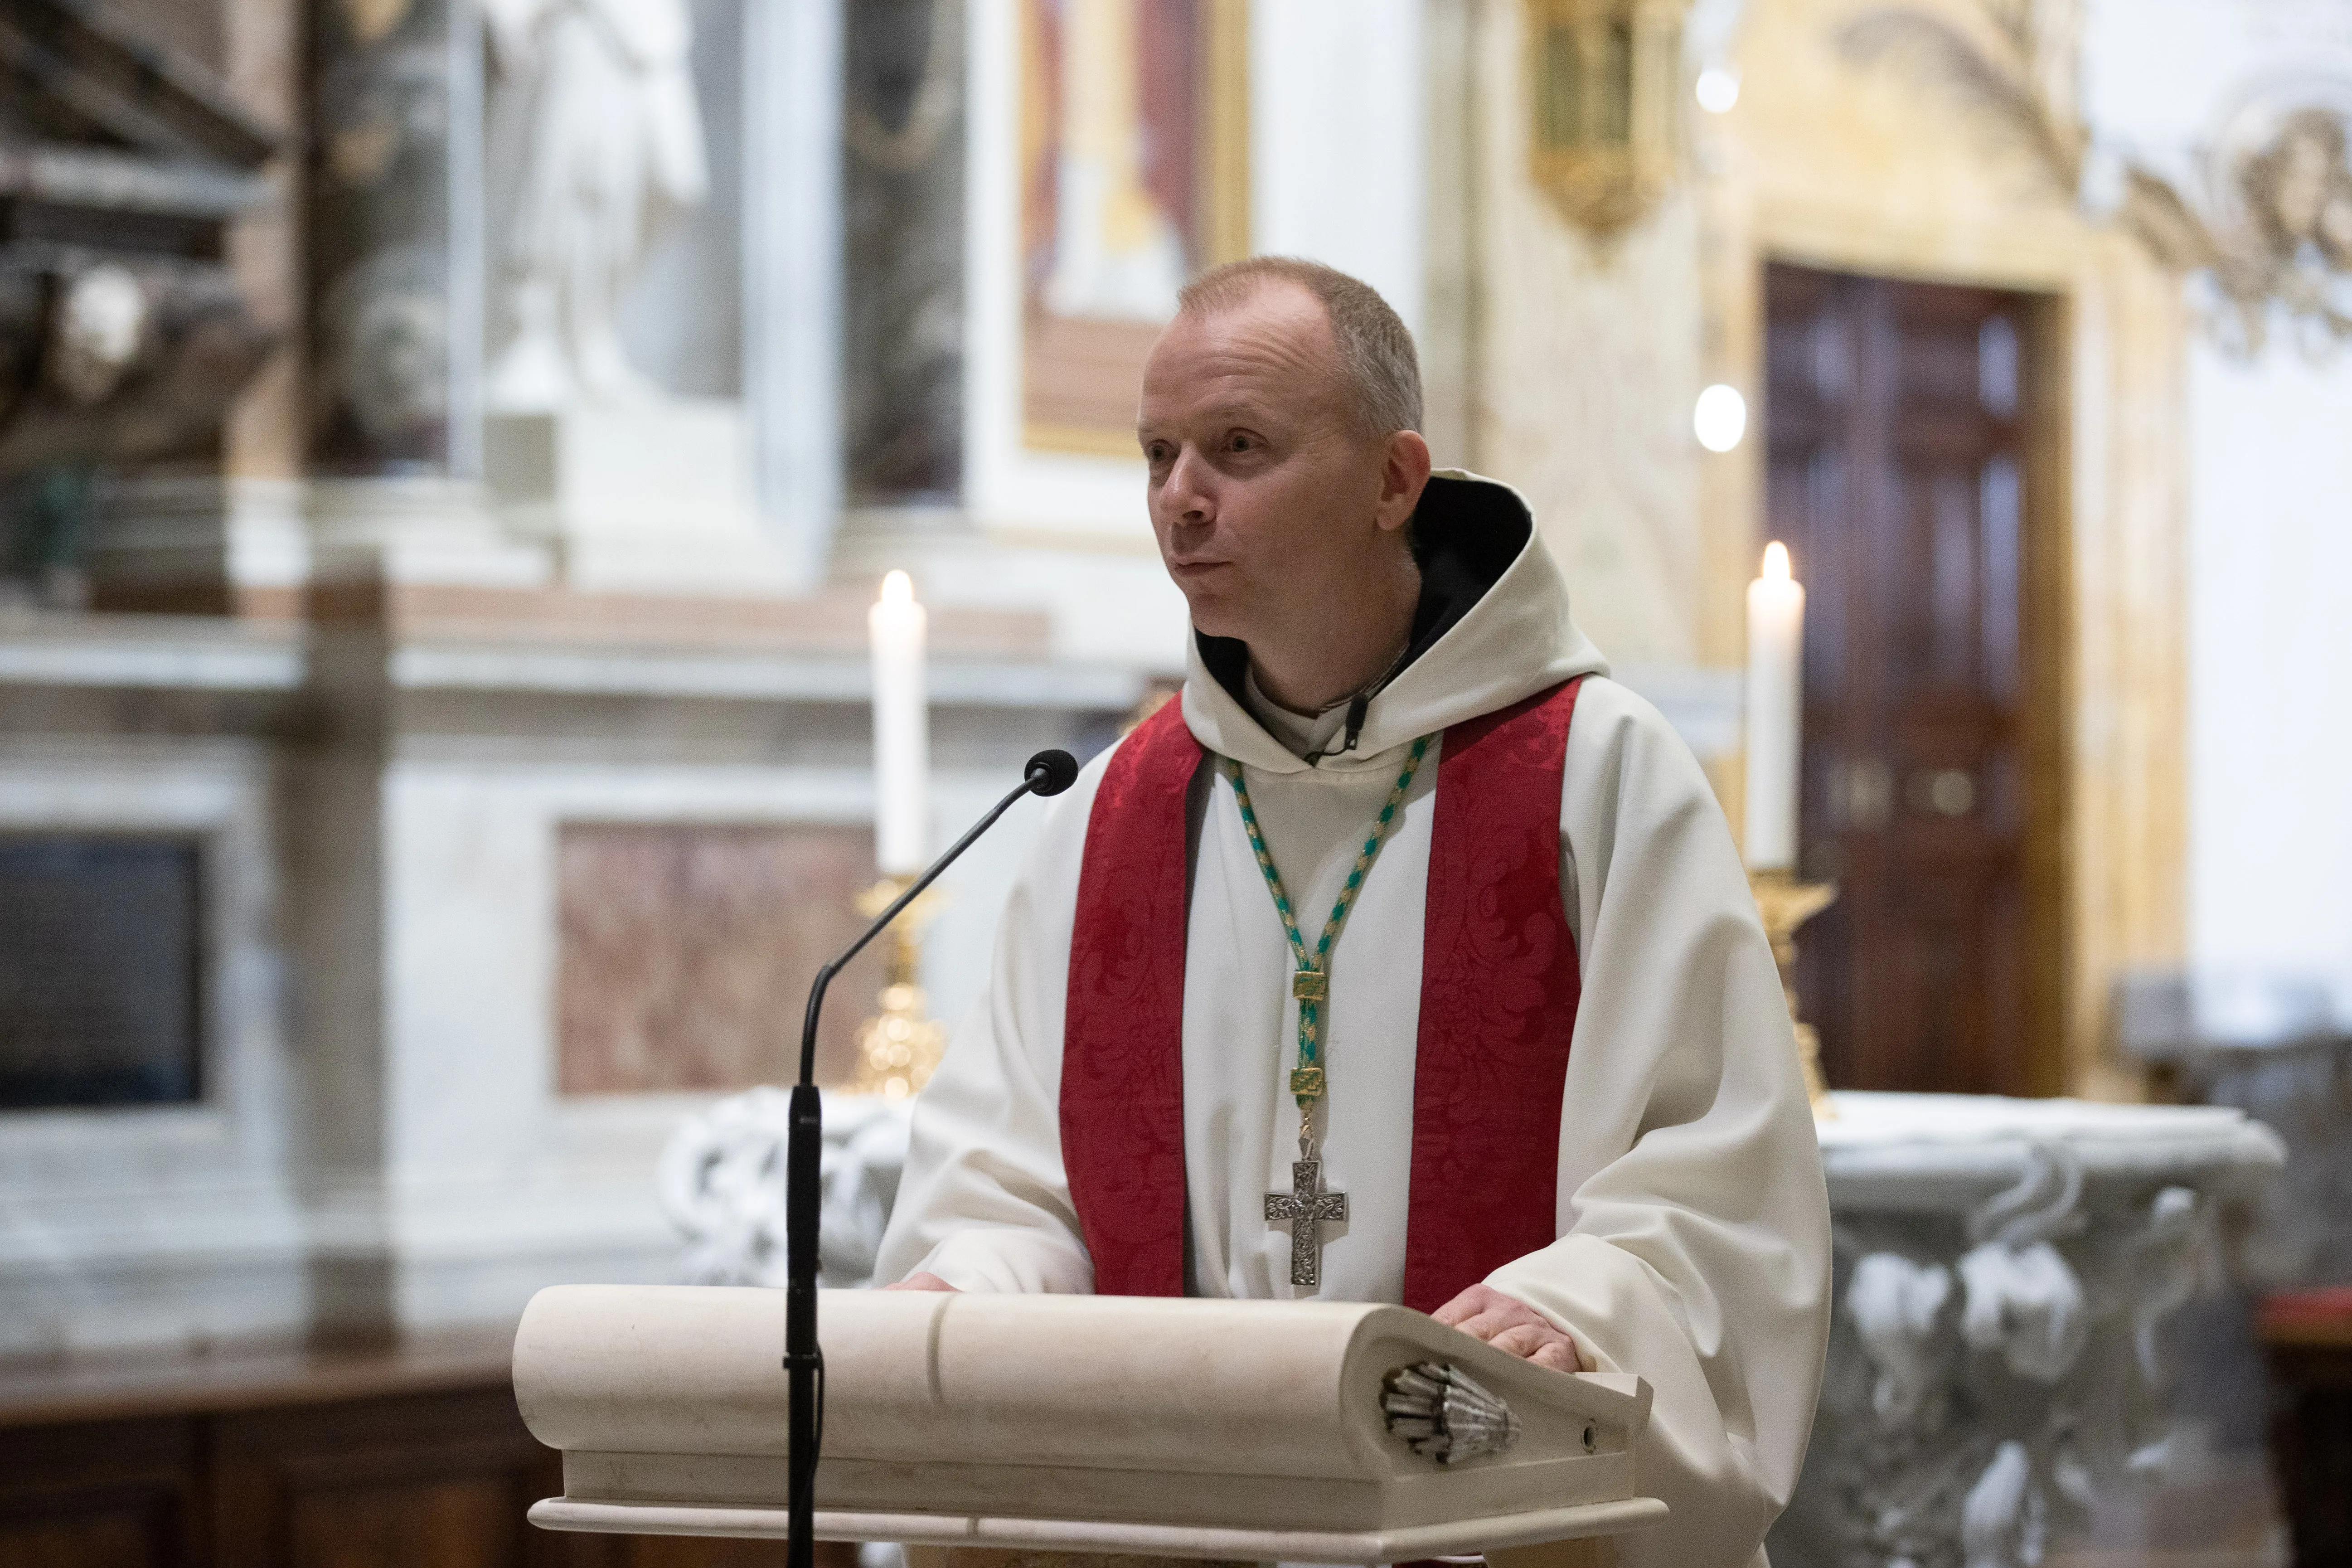 Bishop Erik Varden O.C.S.O, of the Catholic Territorial Prelature of Trondheim, Norway, at the vespers at Santa Maria dell'Anima in Rome.?w=200&h=150